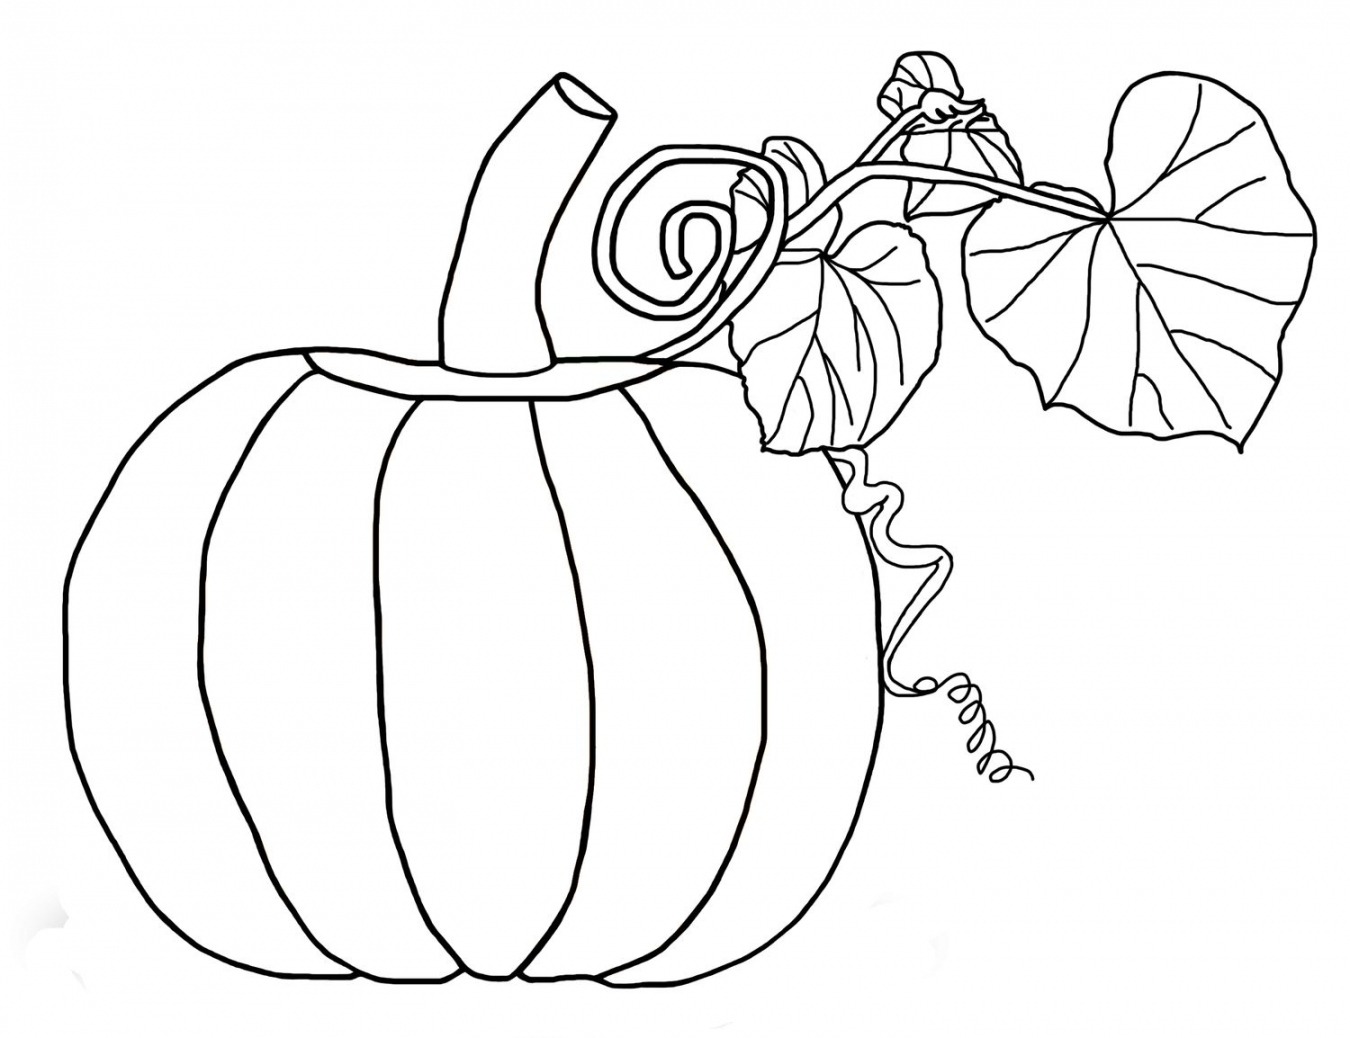 Free Printable Pumpkin Coloring Pages - Printable - Free Pumpkin Coloring Pages for Kids